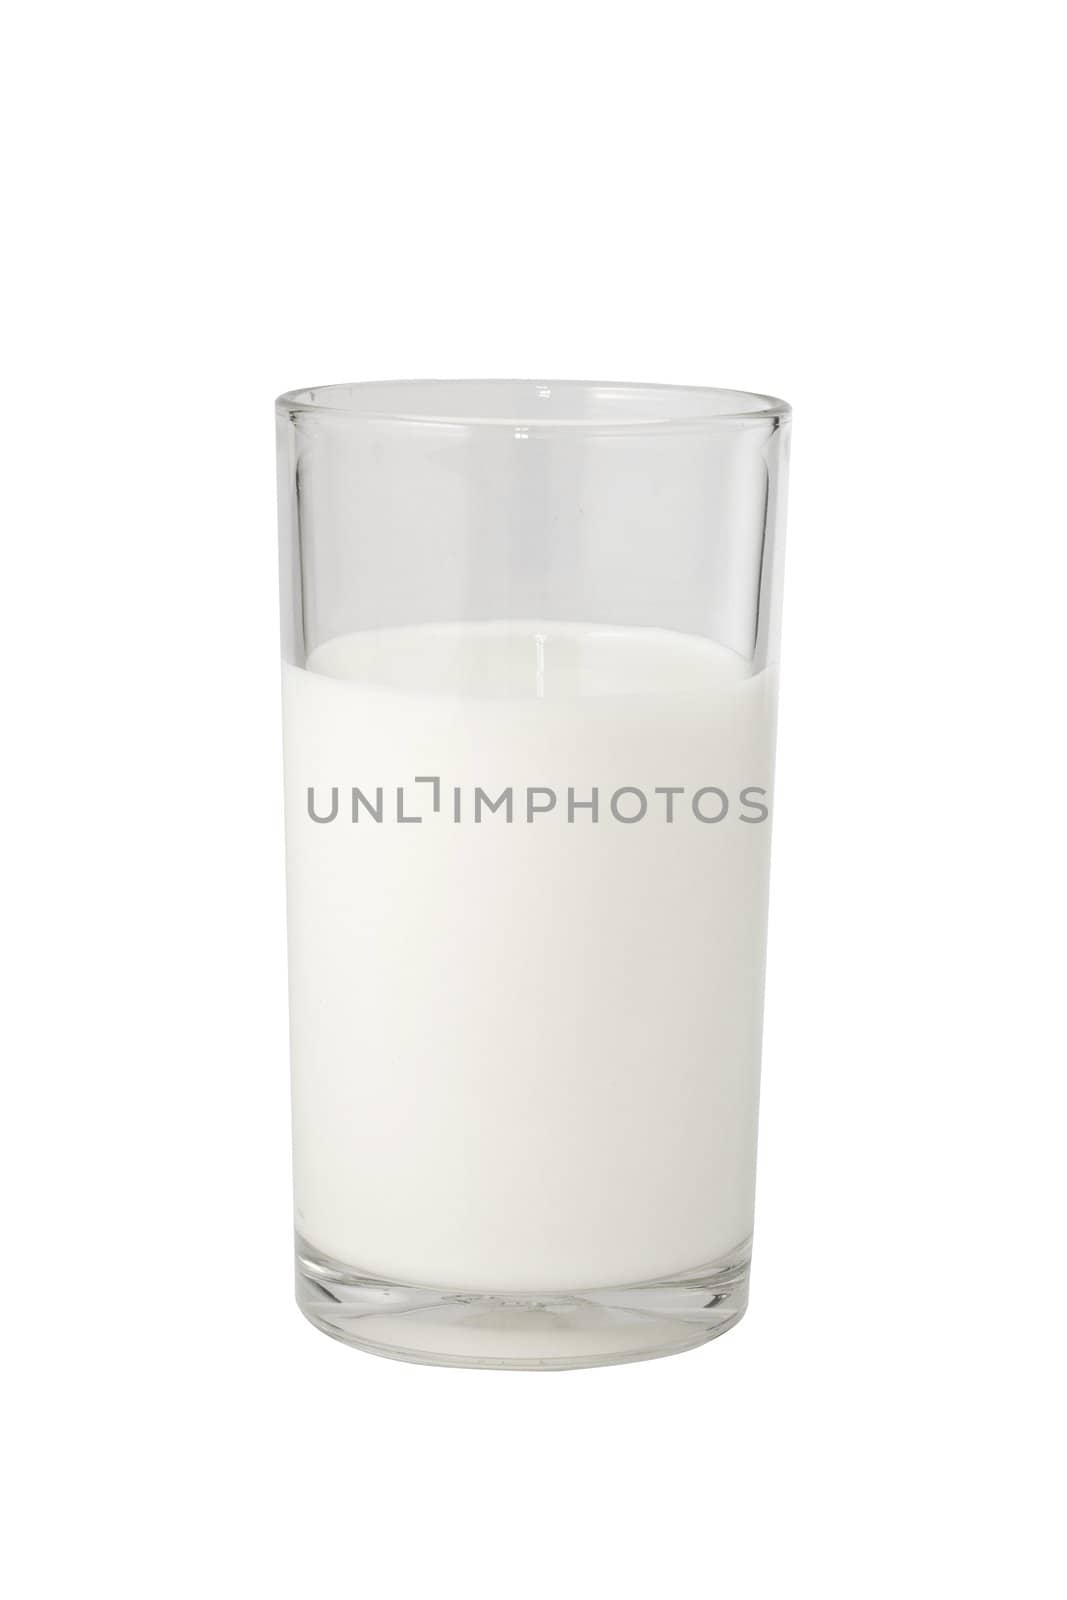 Milk in clear glass, Isolated